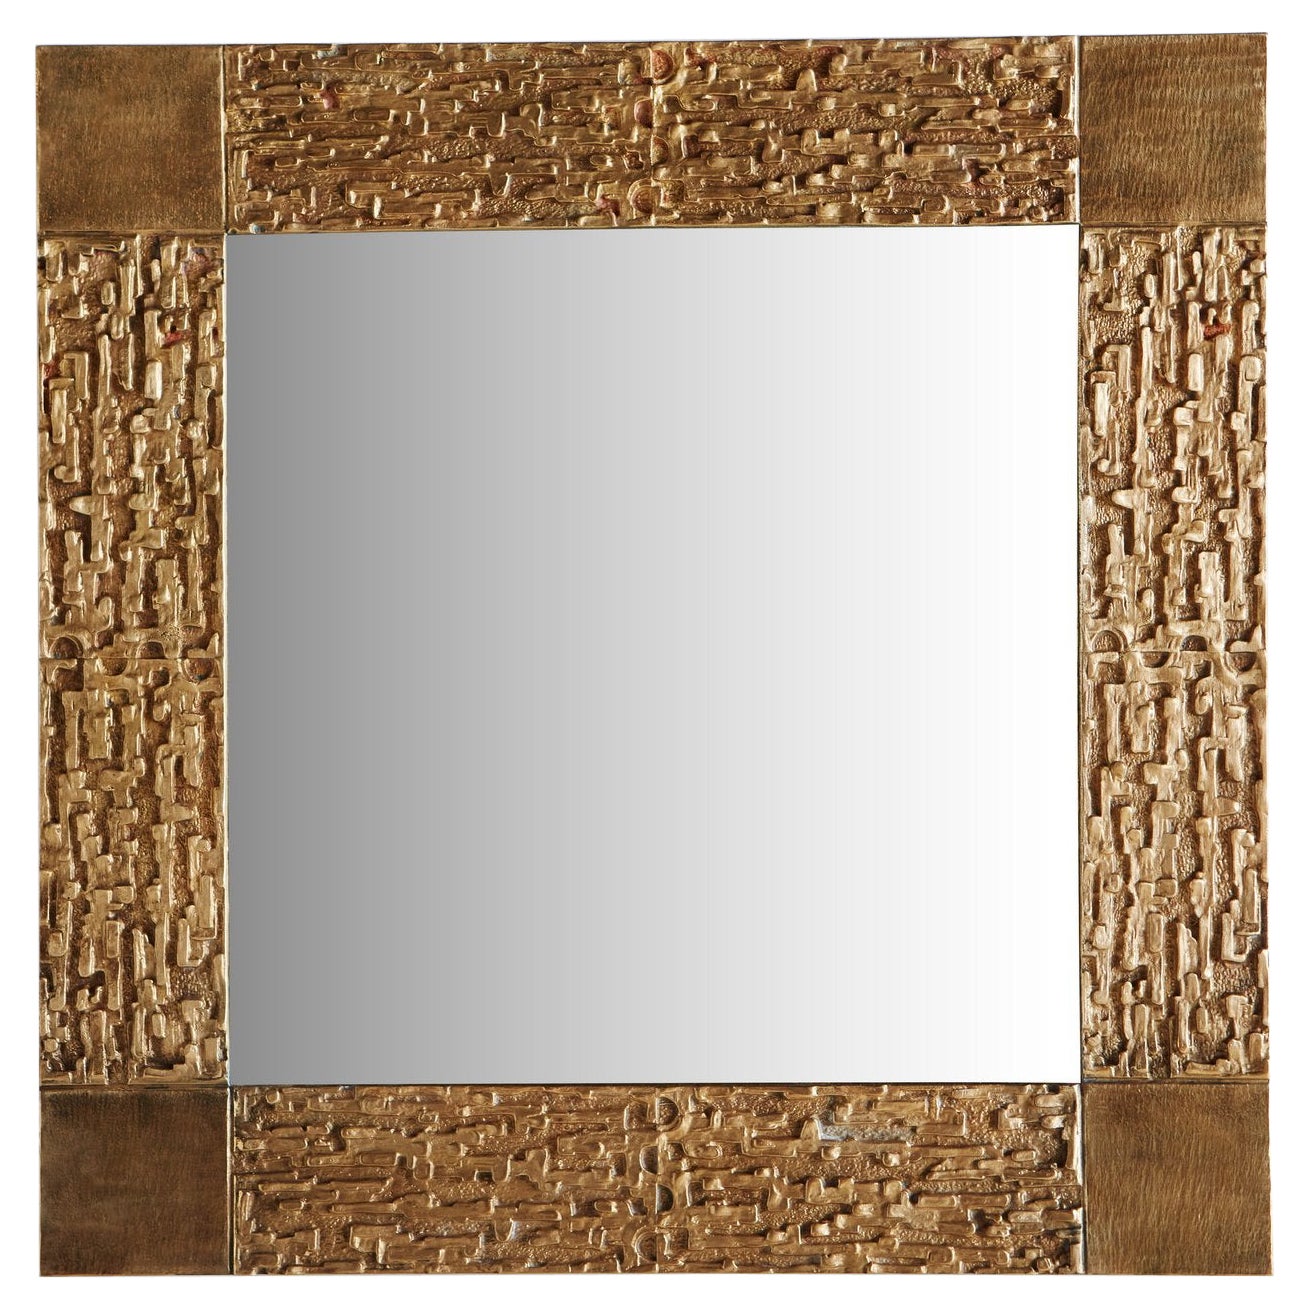 Brutalist Square Brass Frame Mirror Attributed to Luciano Frigerio, Italy 1970s For Sale